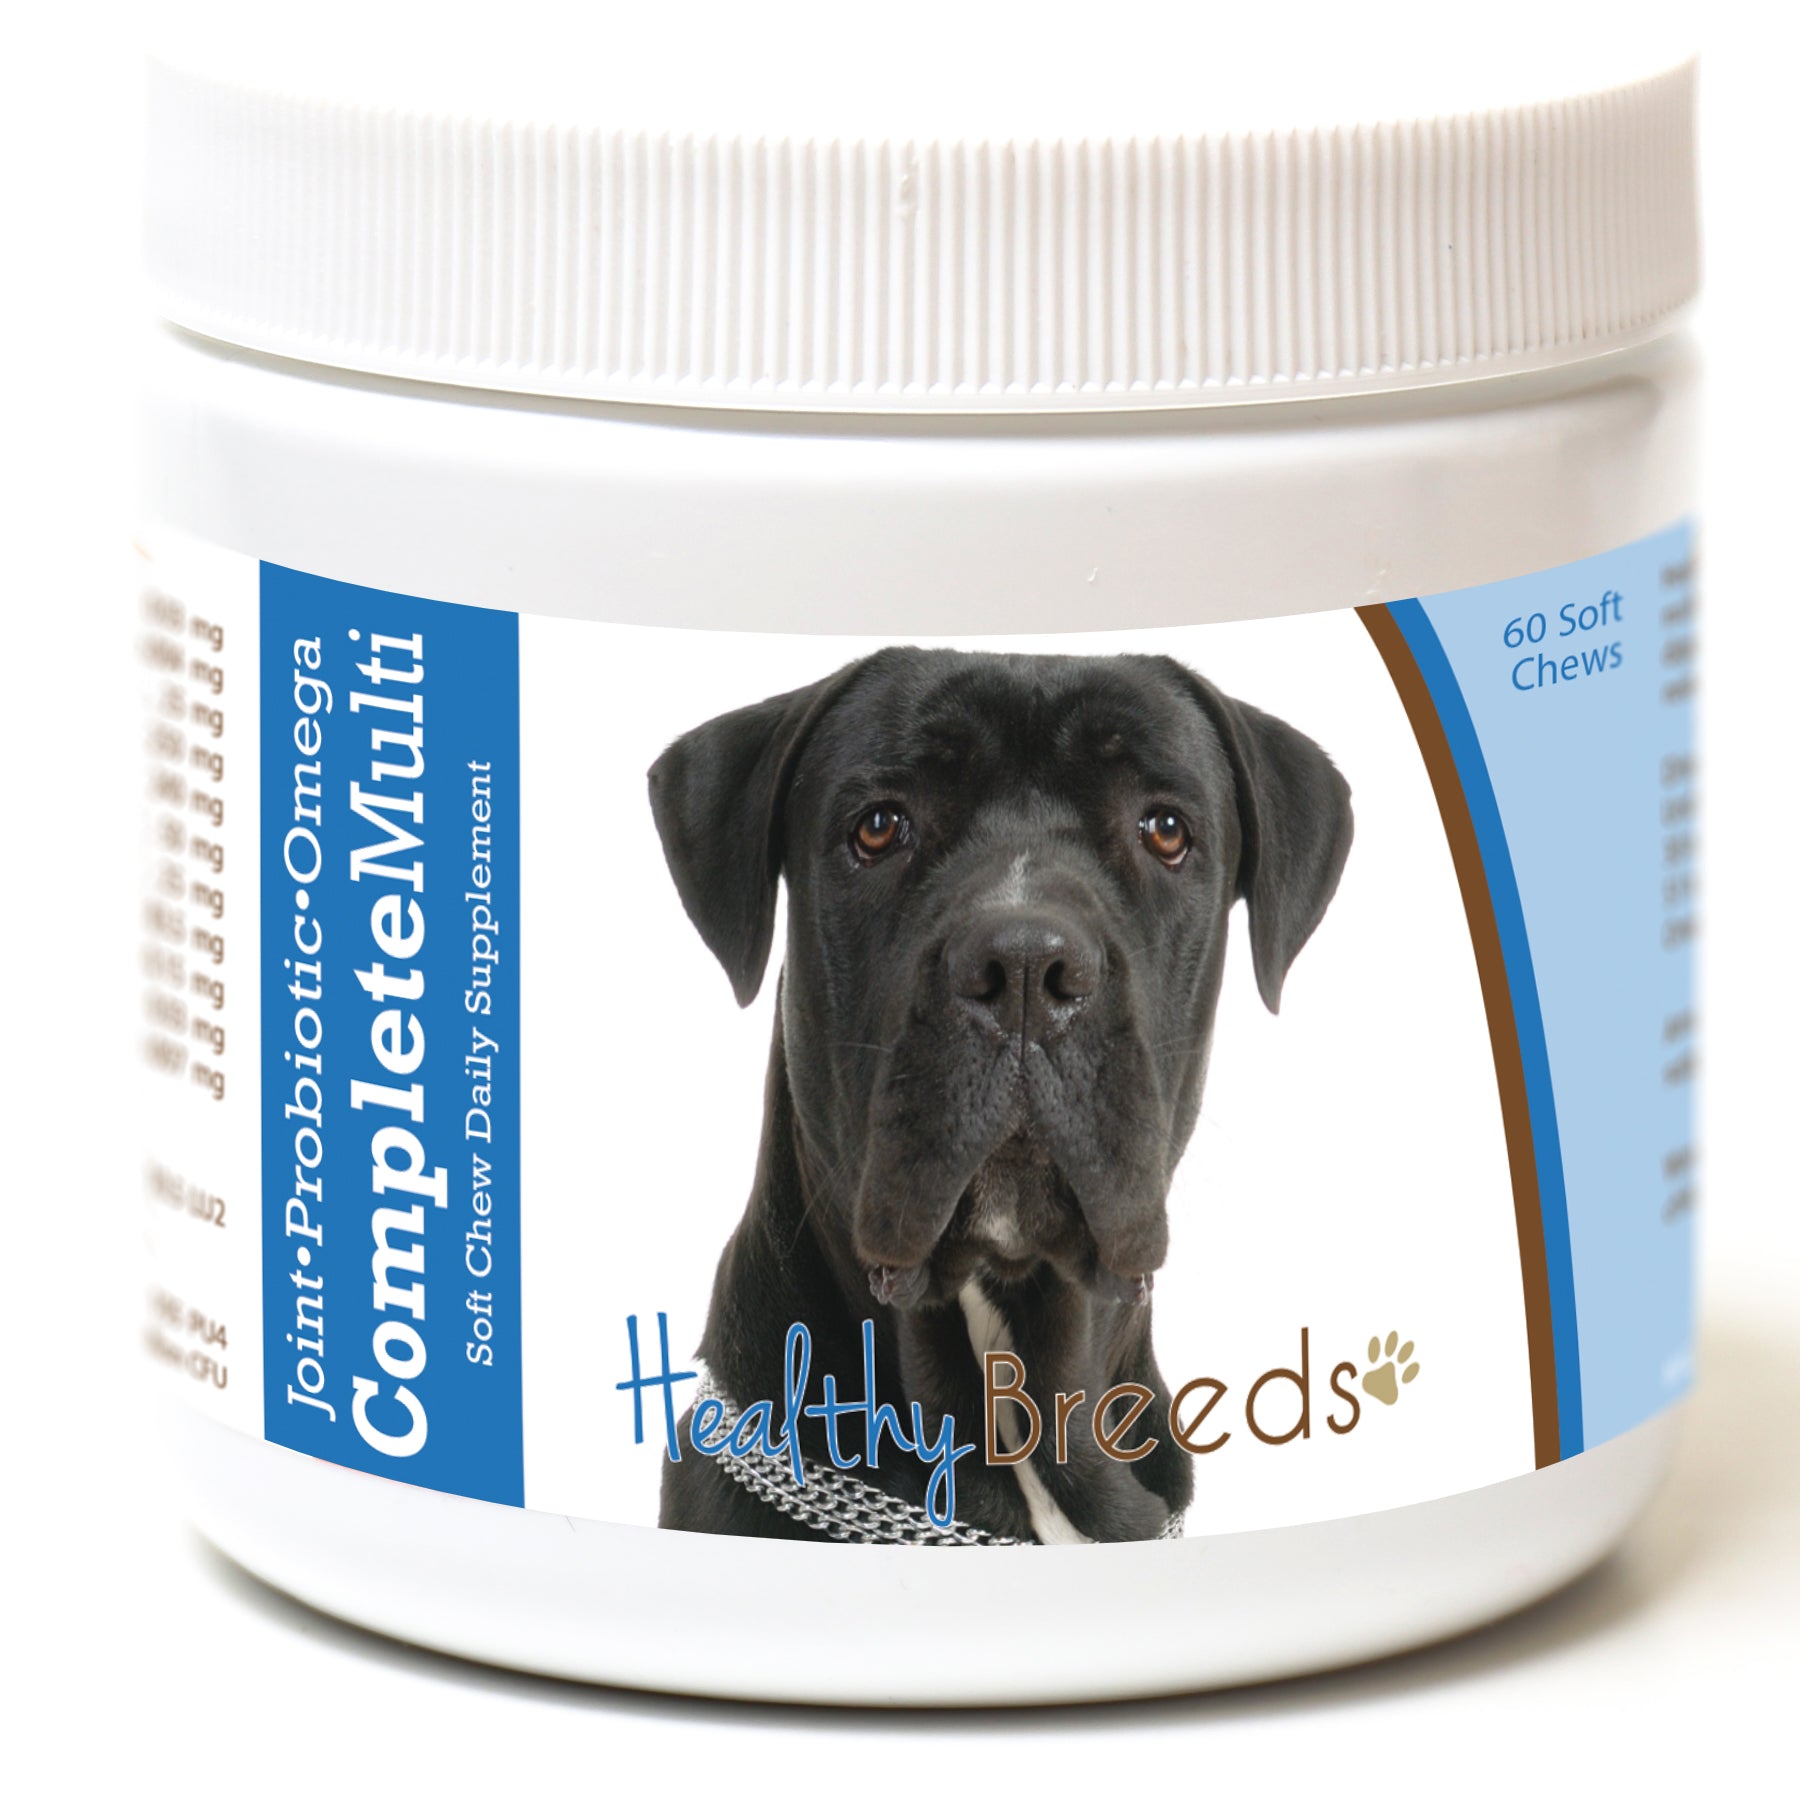 Healthy Breeds Cane Corso All In One Multivitamin Soft Chew 60 Count